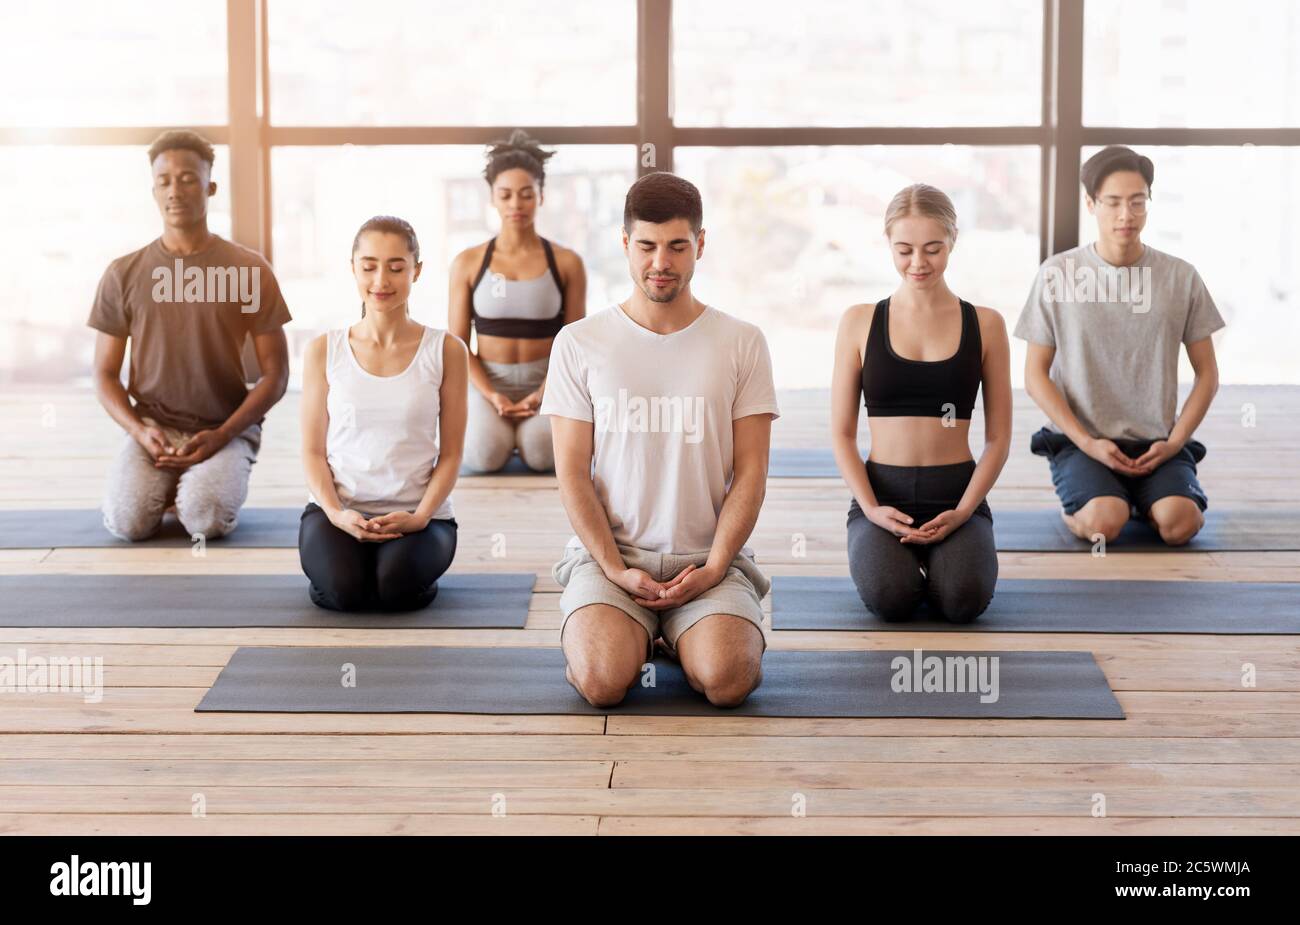 Group Meditation. Multiethnic People Practicing Breathing Yoga Exercises With Instructor In Studio Stock Photo